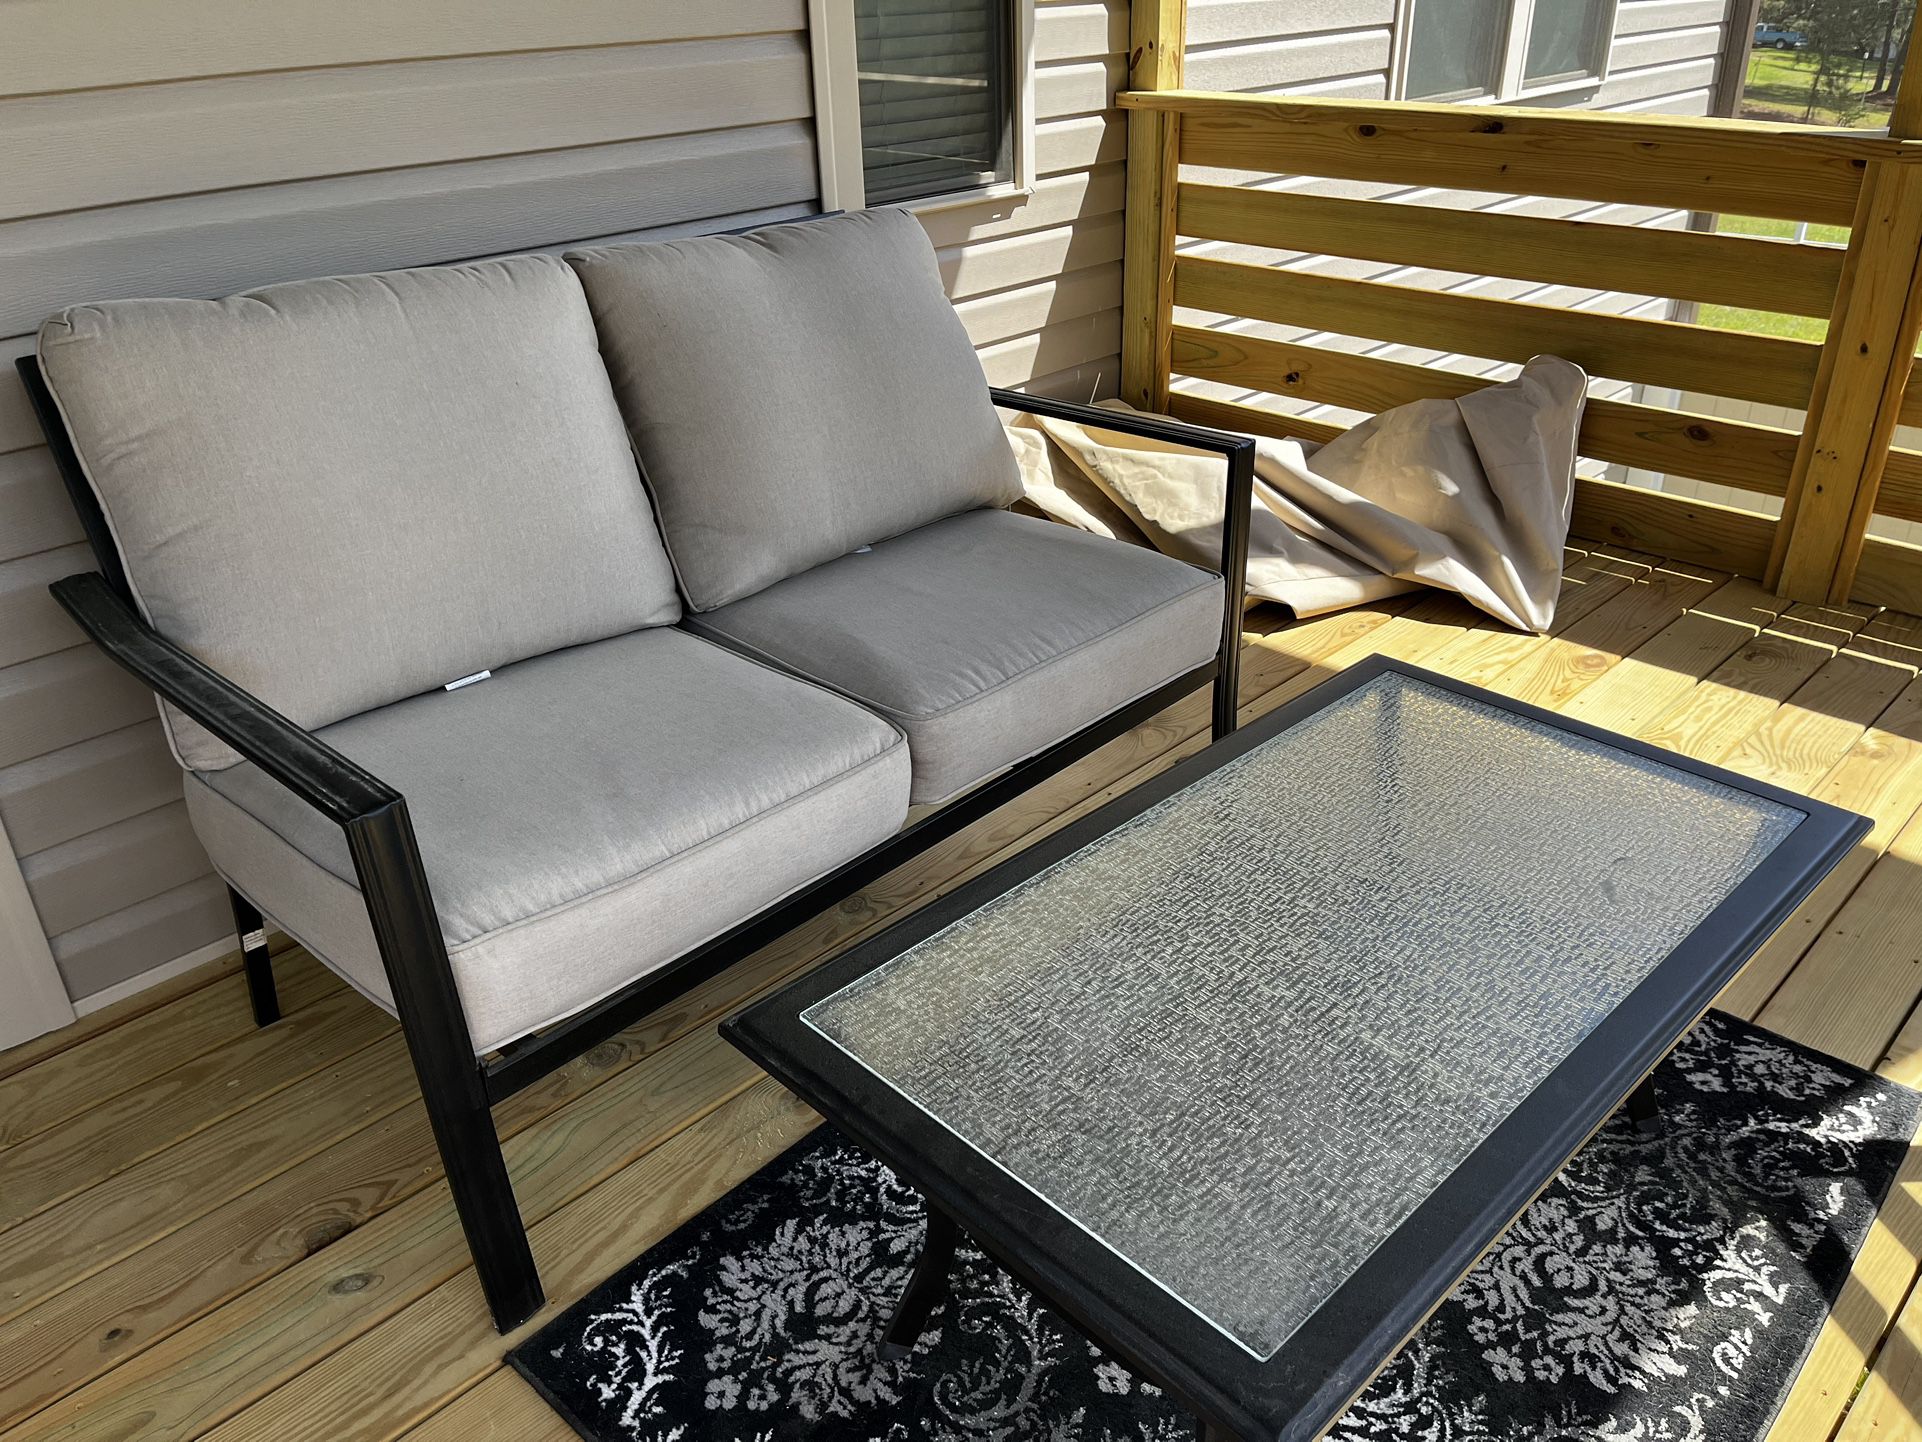 Patio Loveseat And Table